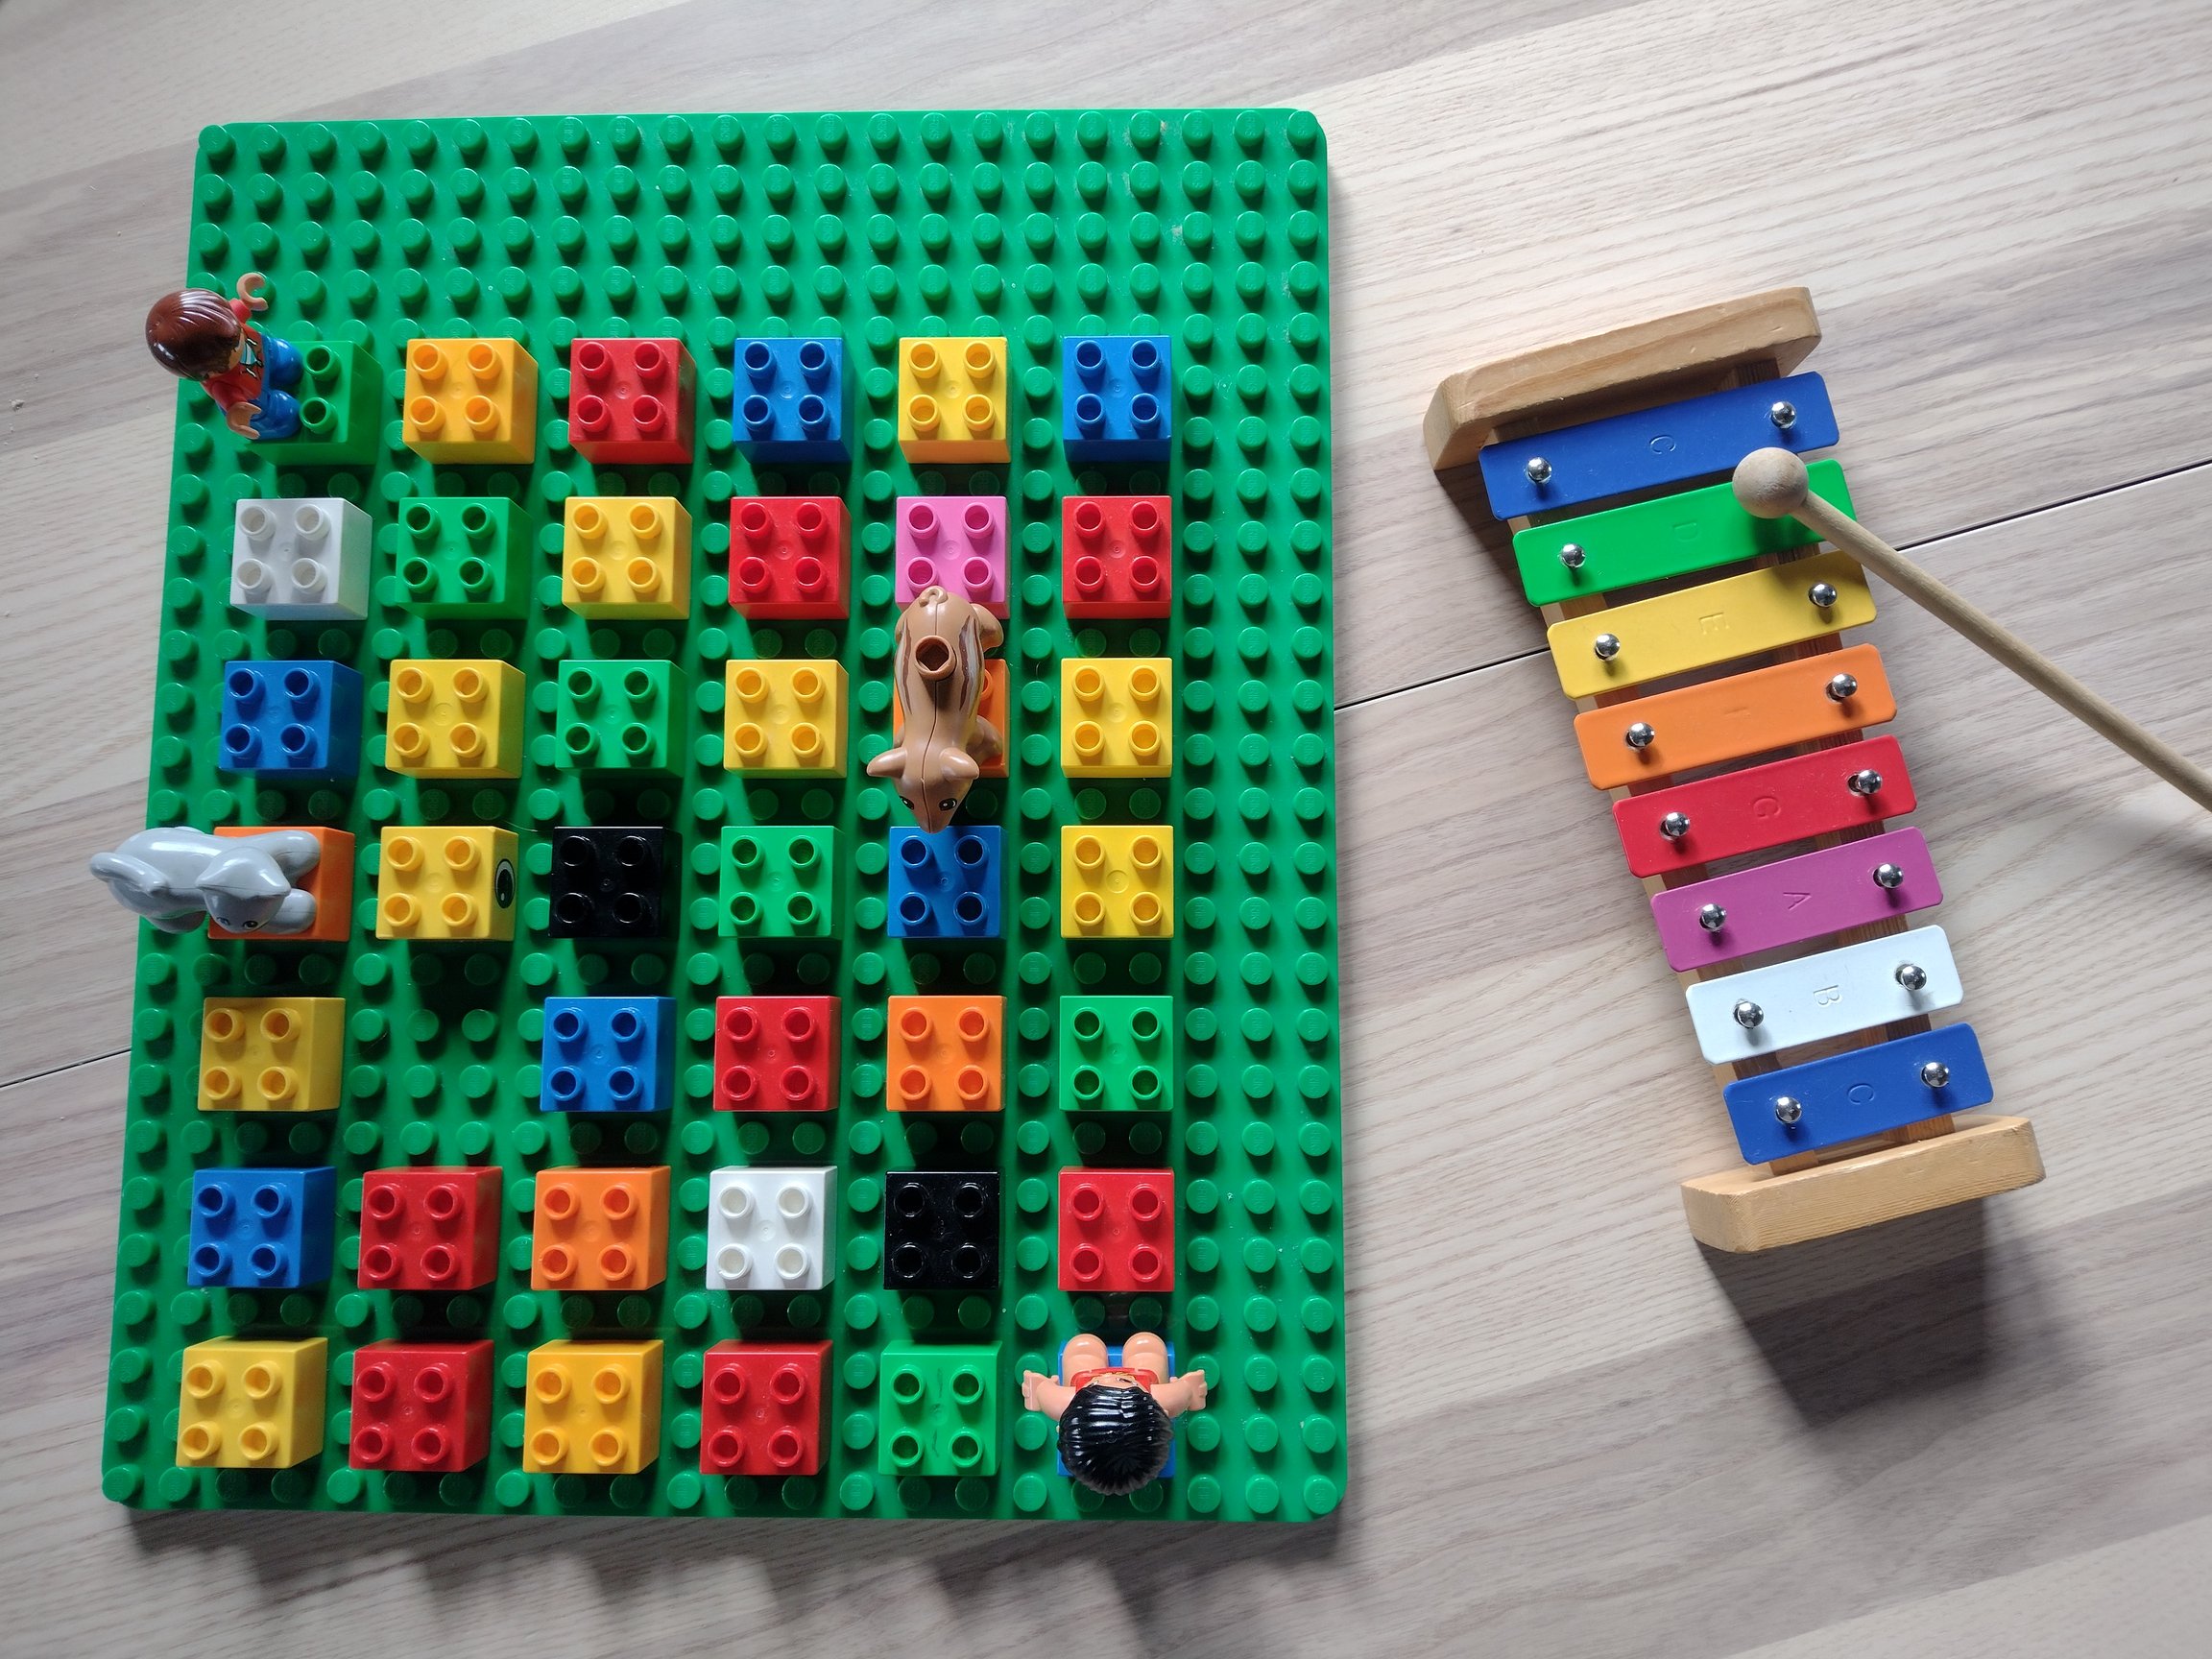 Play the glockenspiel to move the Lego figure